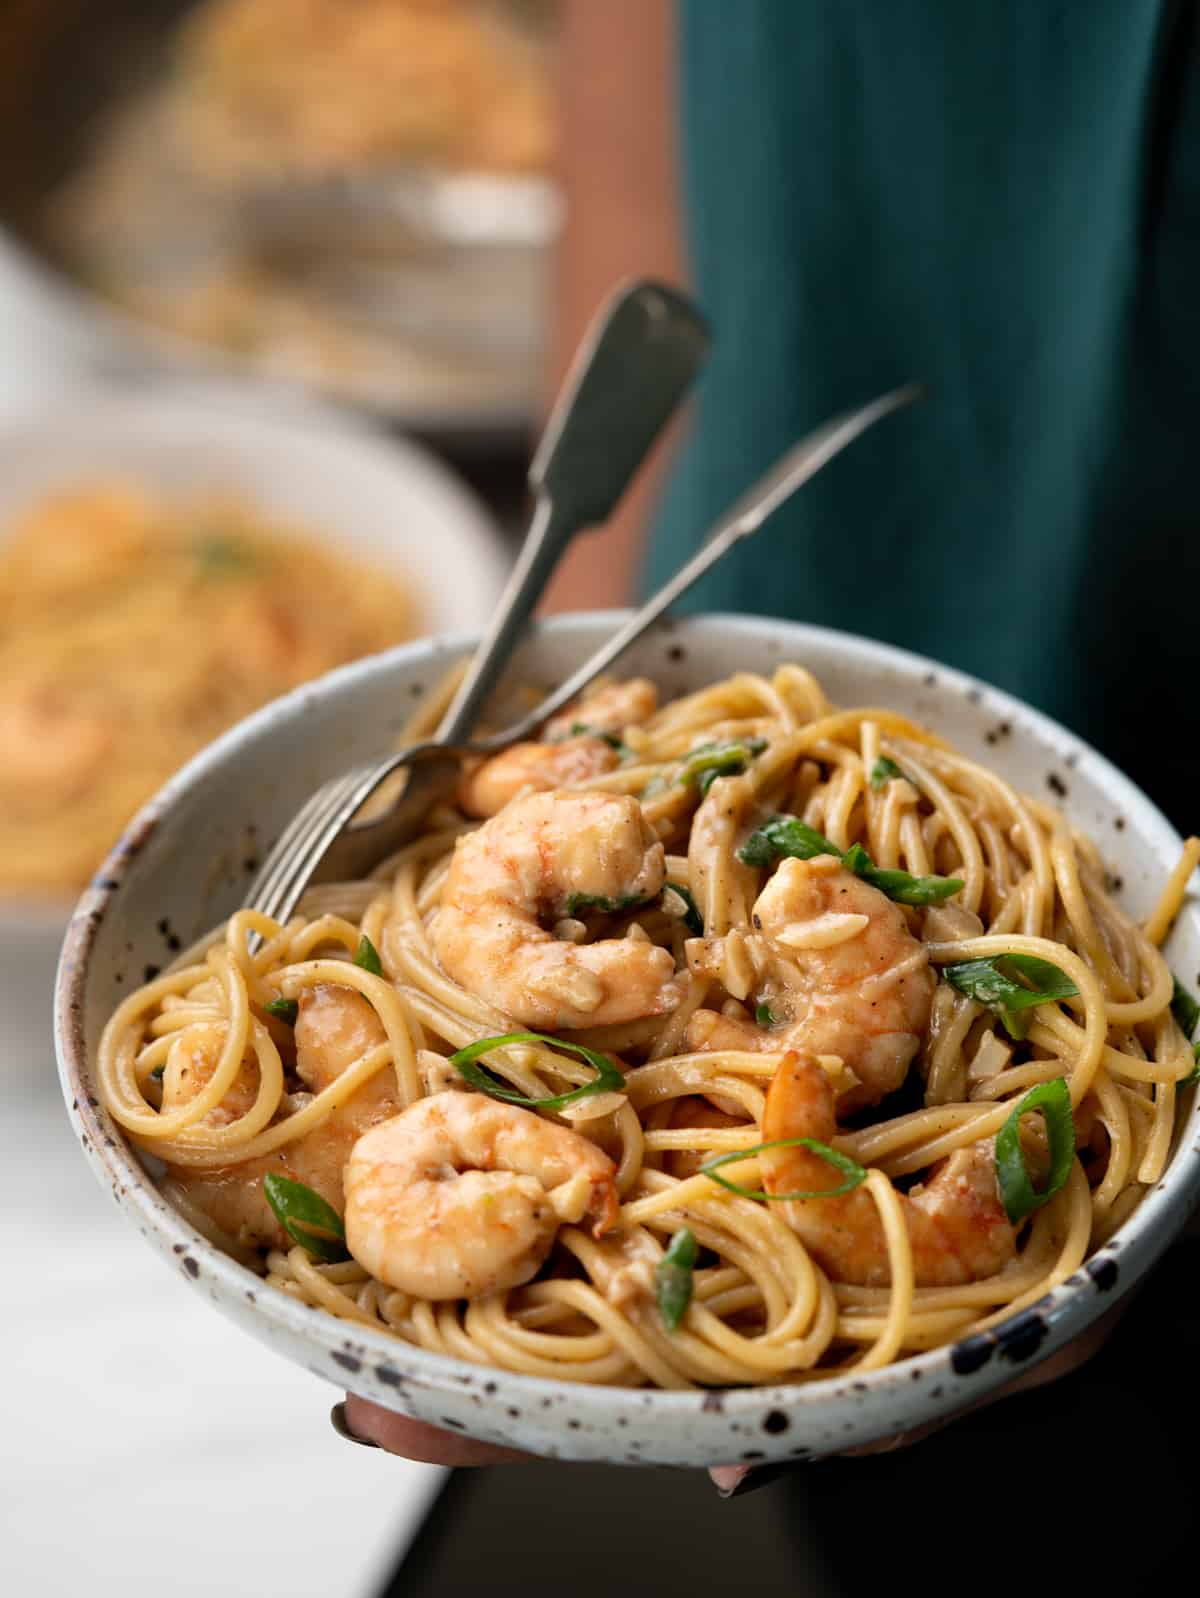 Shrimp and spaghetti noodles tossed in a garlic butter sauce with an asian twist. 